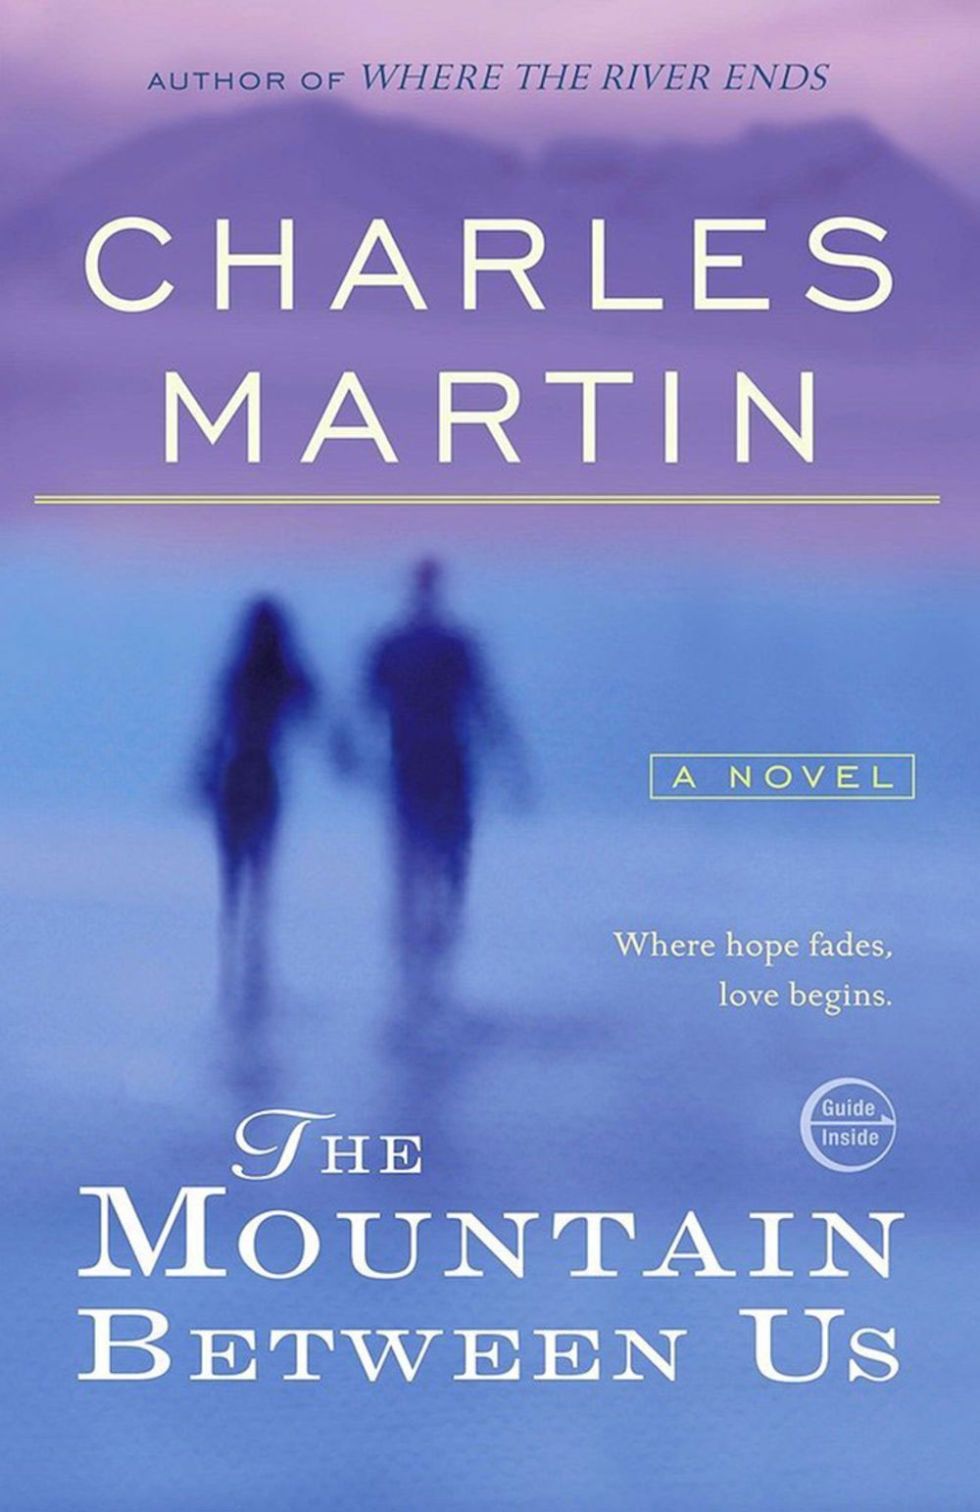 elle-the-mountain-between-us-charles-martin